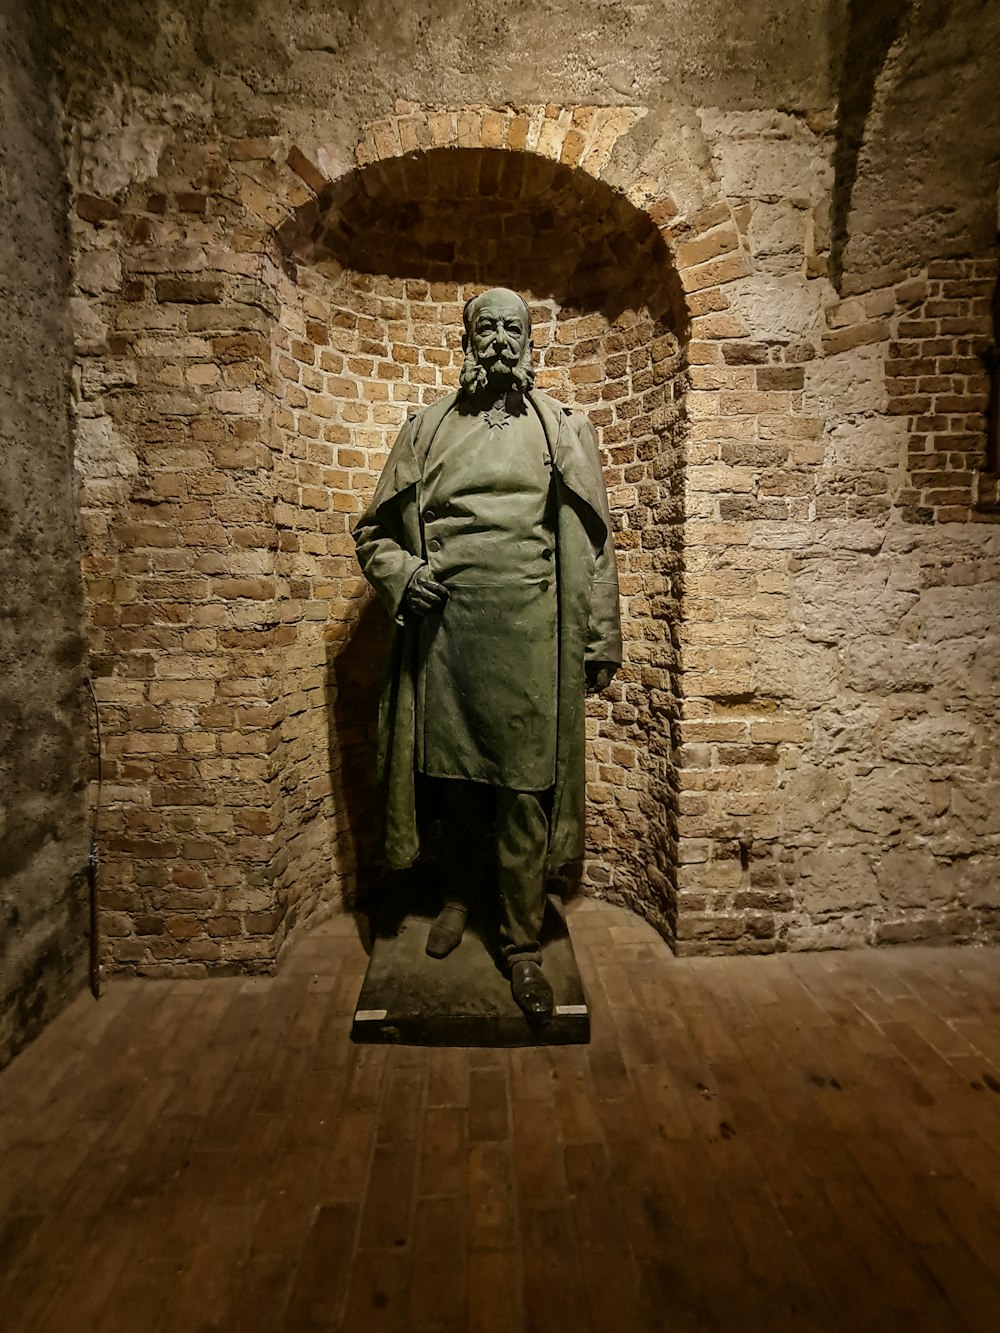 a statue of a person in a stone building